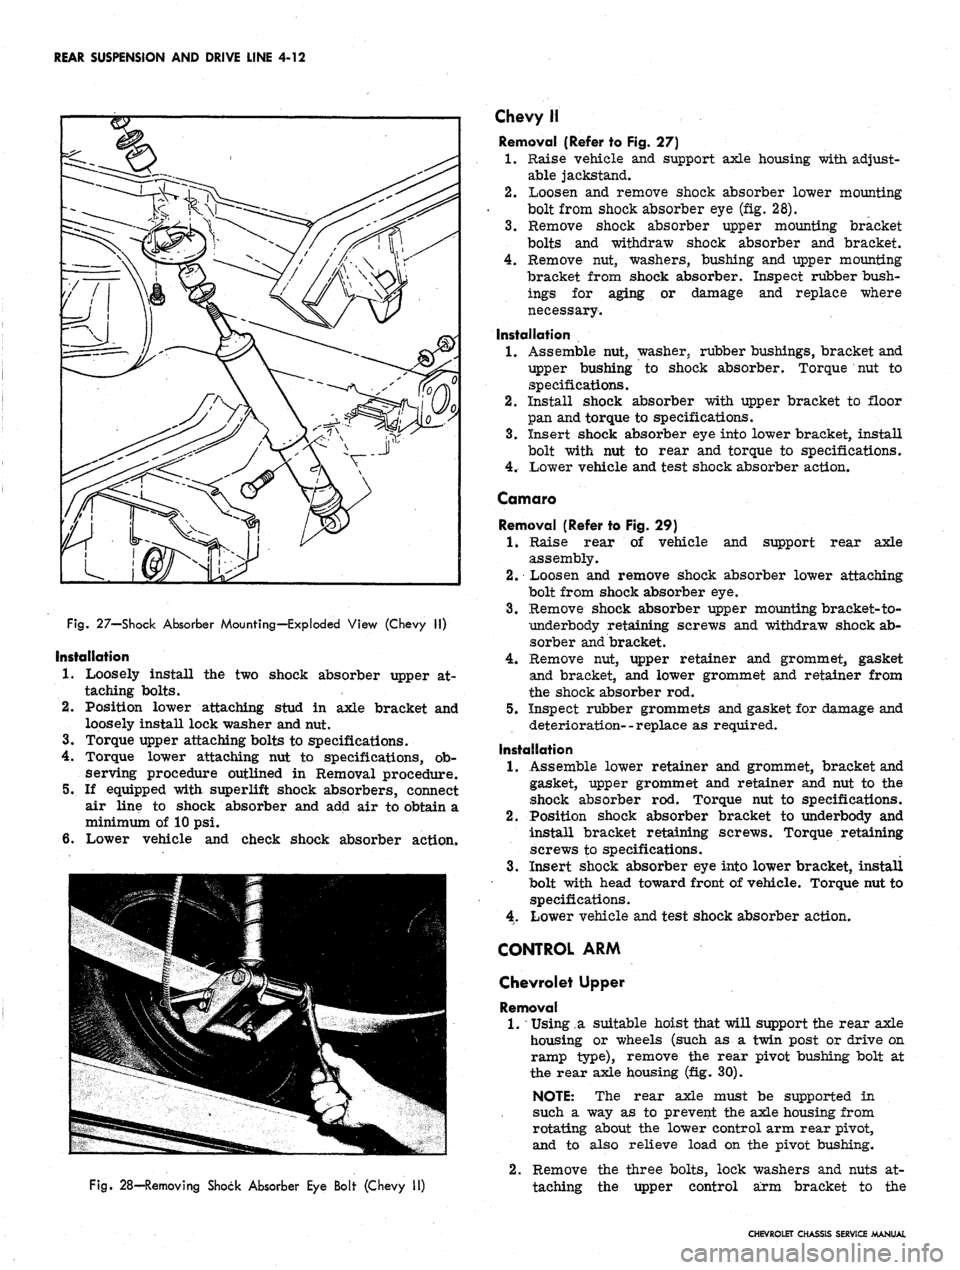 CHEVROLET CAMARO 1967 1.G Chassis Service Manual 
REAR SUSPENSION AND DRIVE LINE 4-12

Fig.
 27—Shock Absorber Mounting—Exploded View (Chevy II)

Installation

1.
 Loosely install the two shock absorber upper at-

taching bolts.

2.
 Position lo